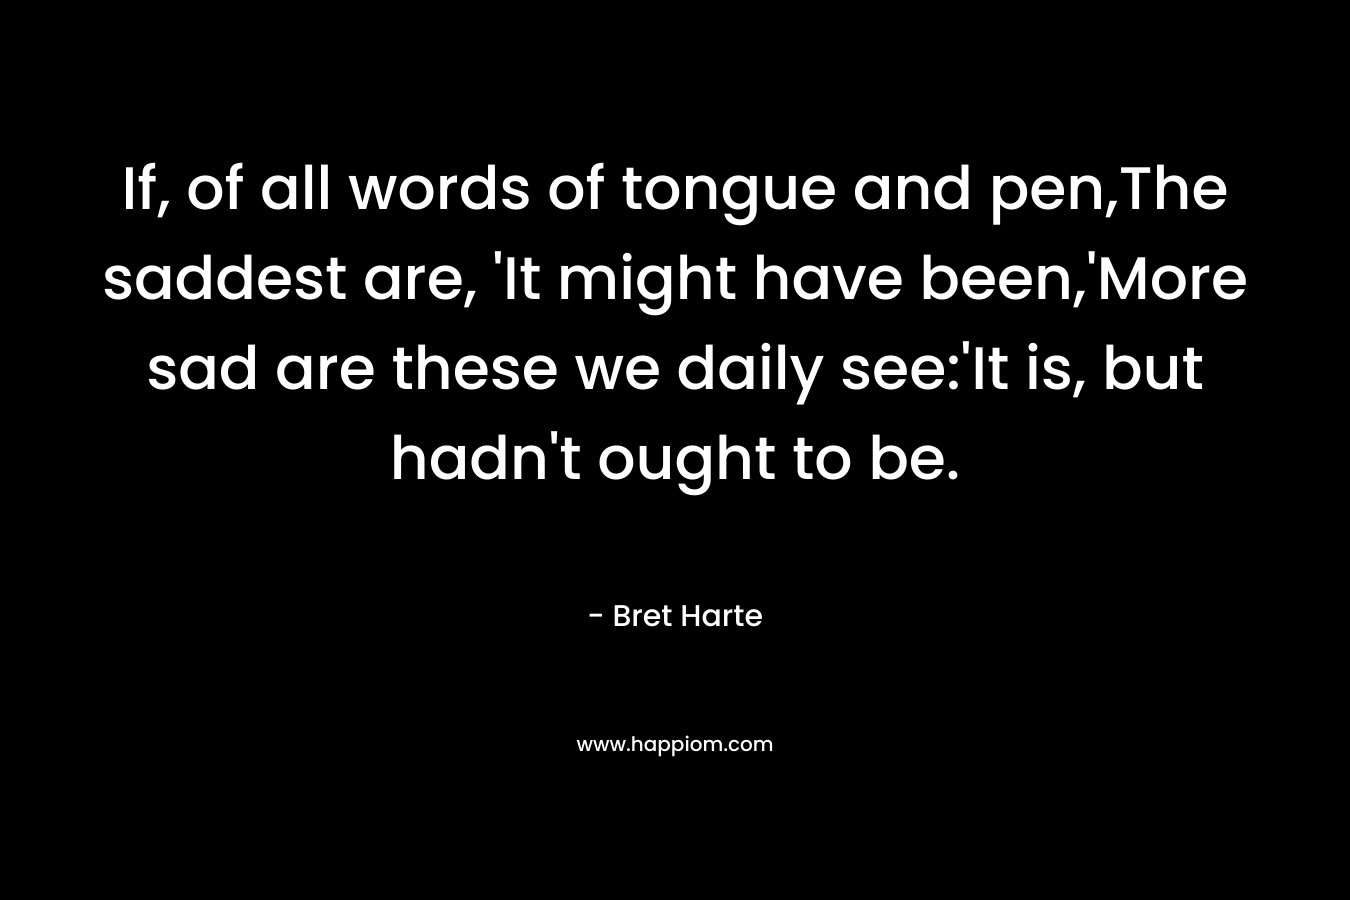 If, of all words of tongue and pen,The saddest are, ‘It might have been,’More sad are these we daily see:’It is, but hadn’t ought to be. – Bret Harte